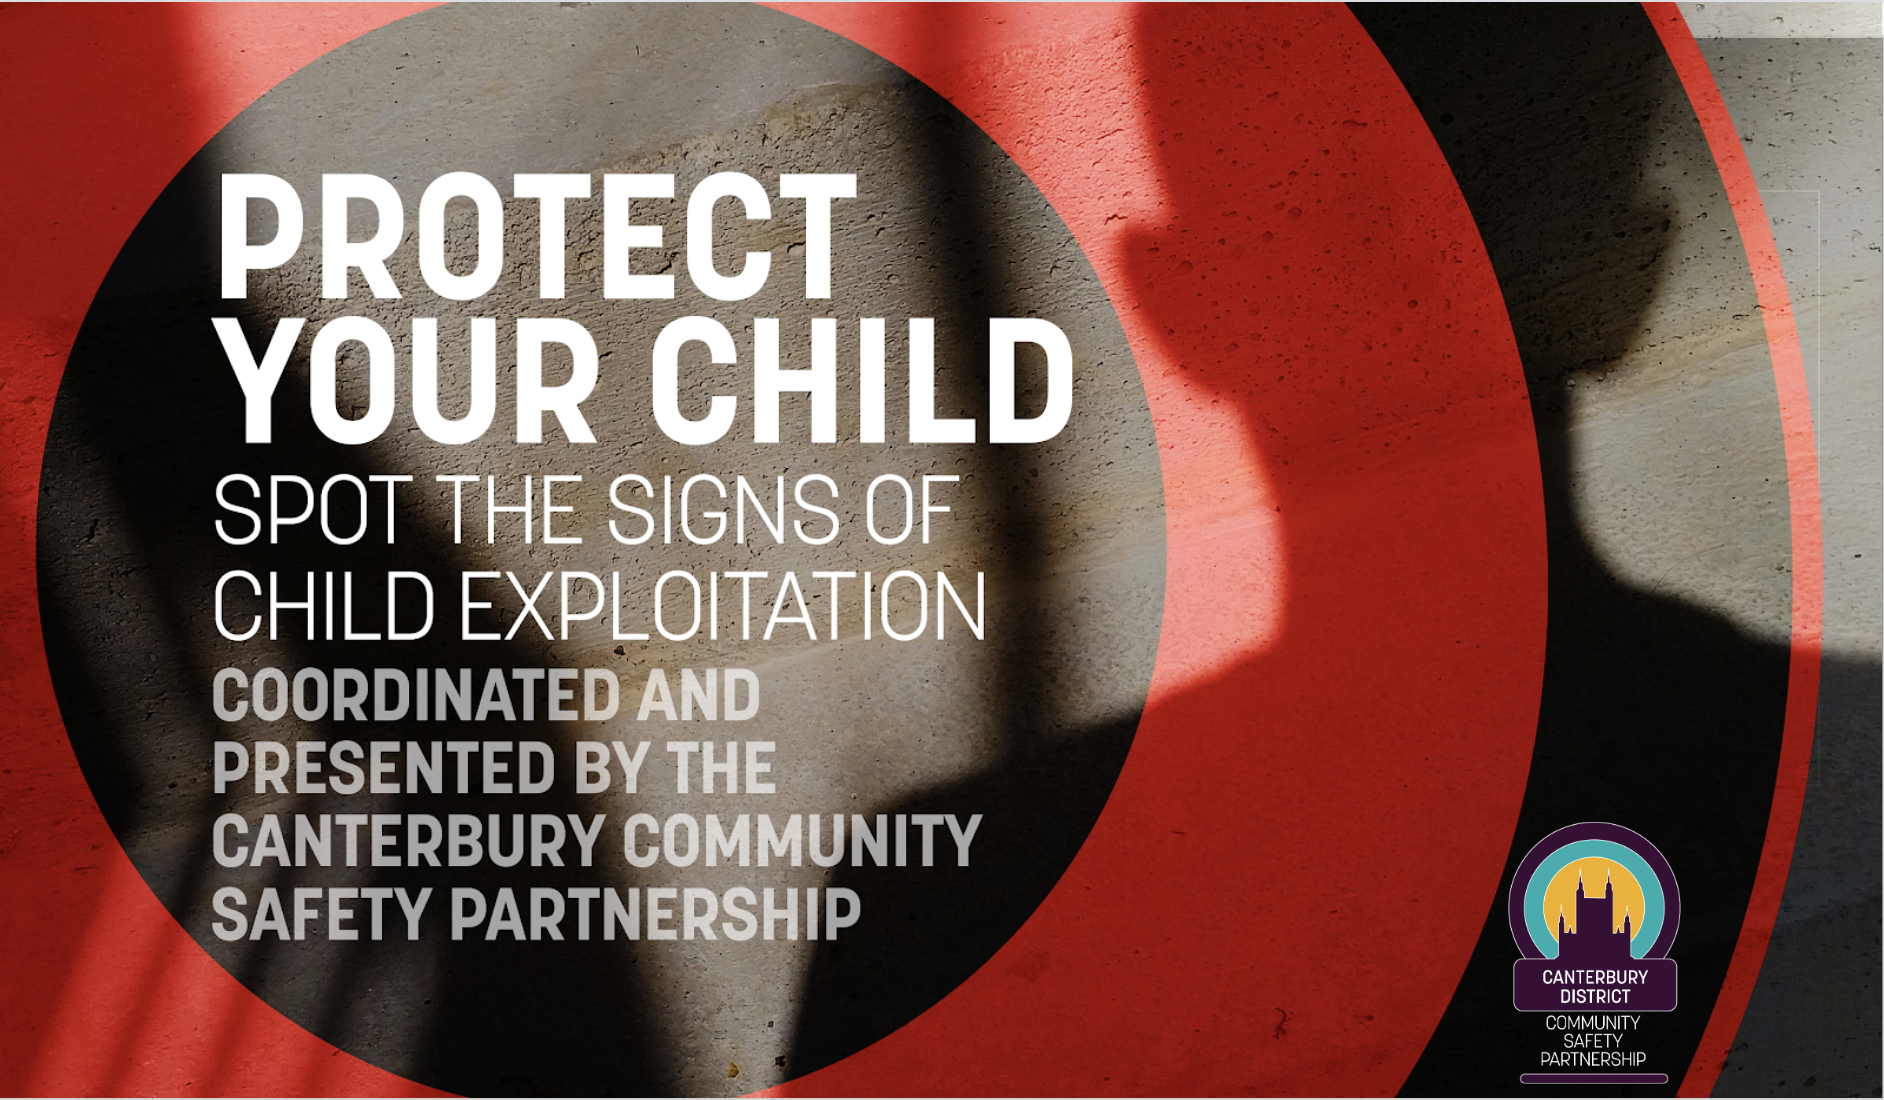 Protect your child: spot the signs of child exploitation - coordinated and presented by the Canterbury Community Safety Partnership